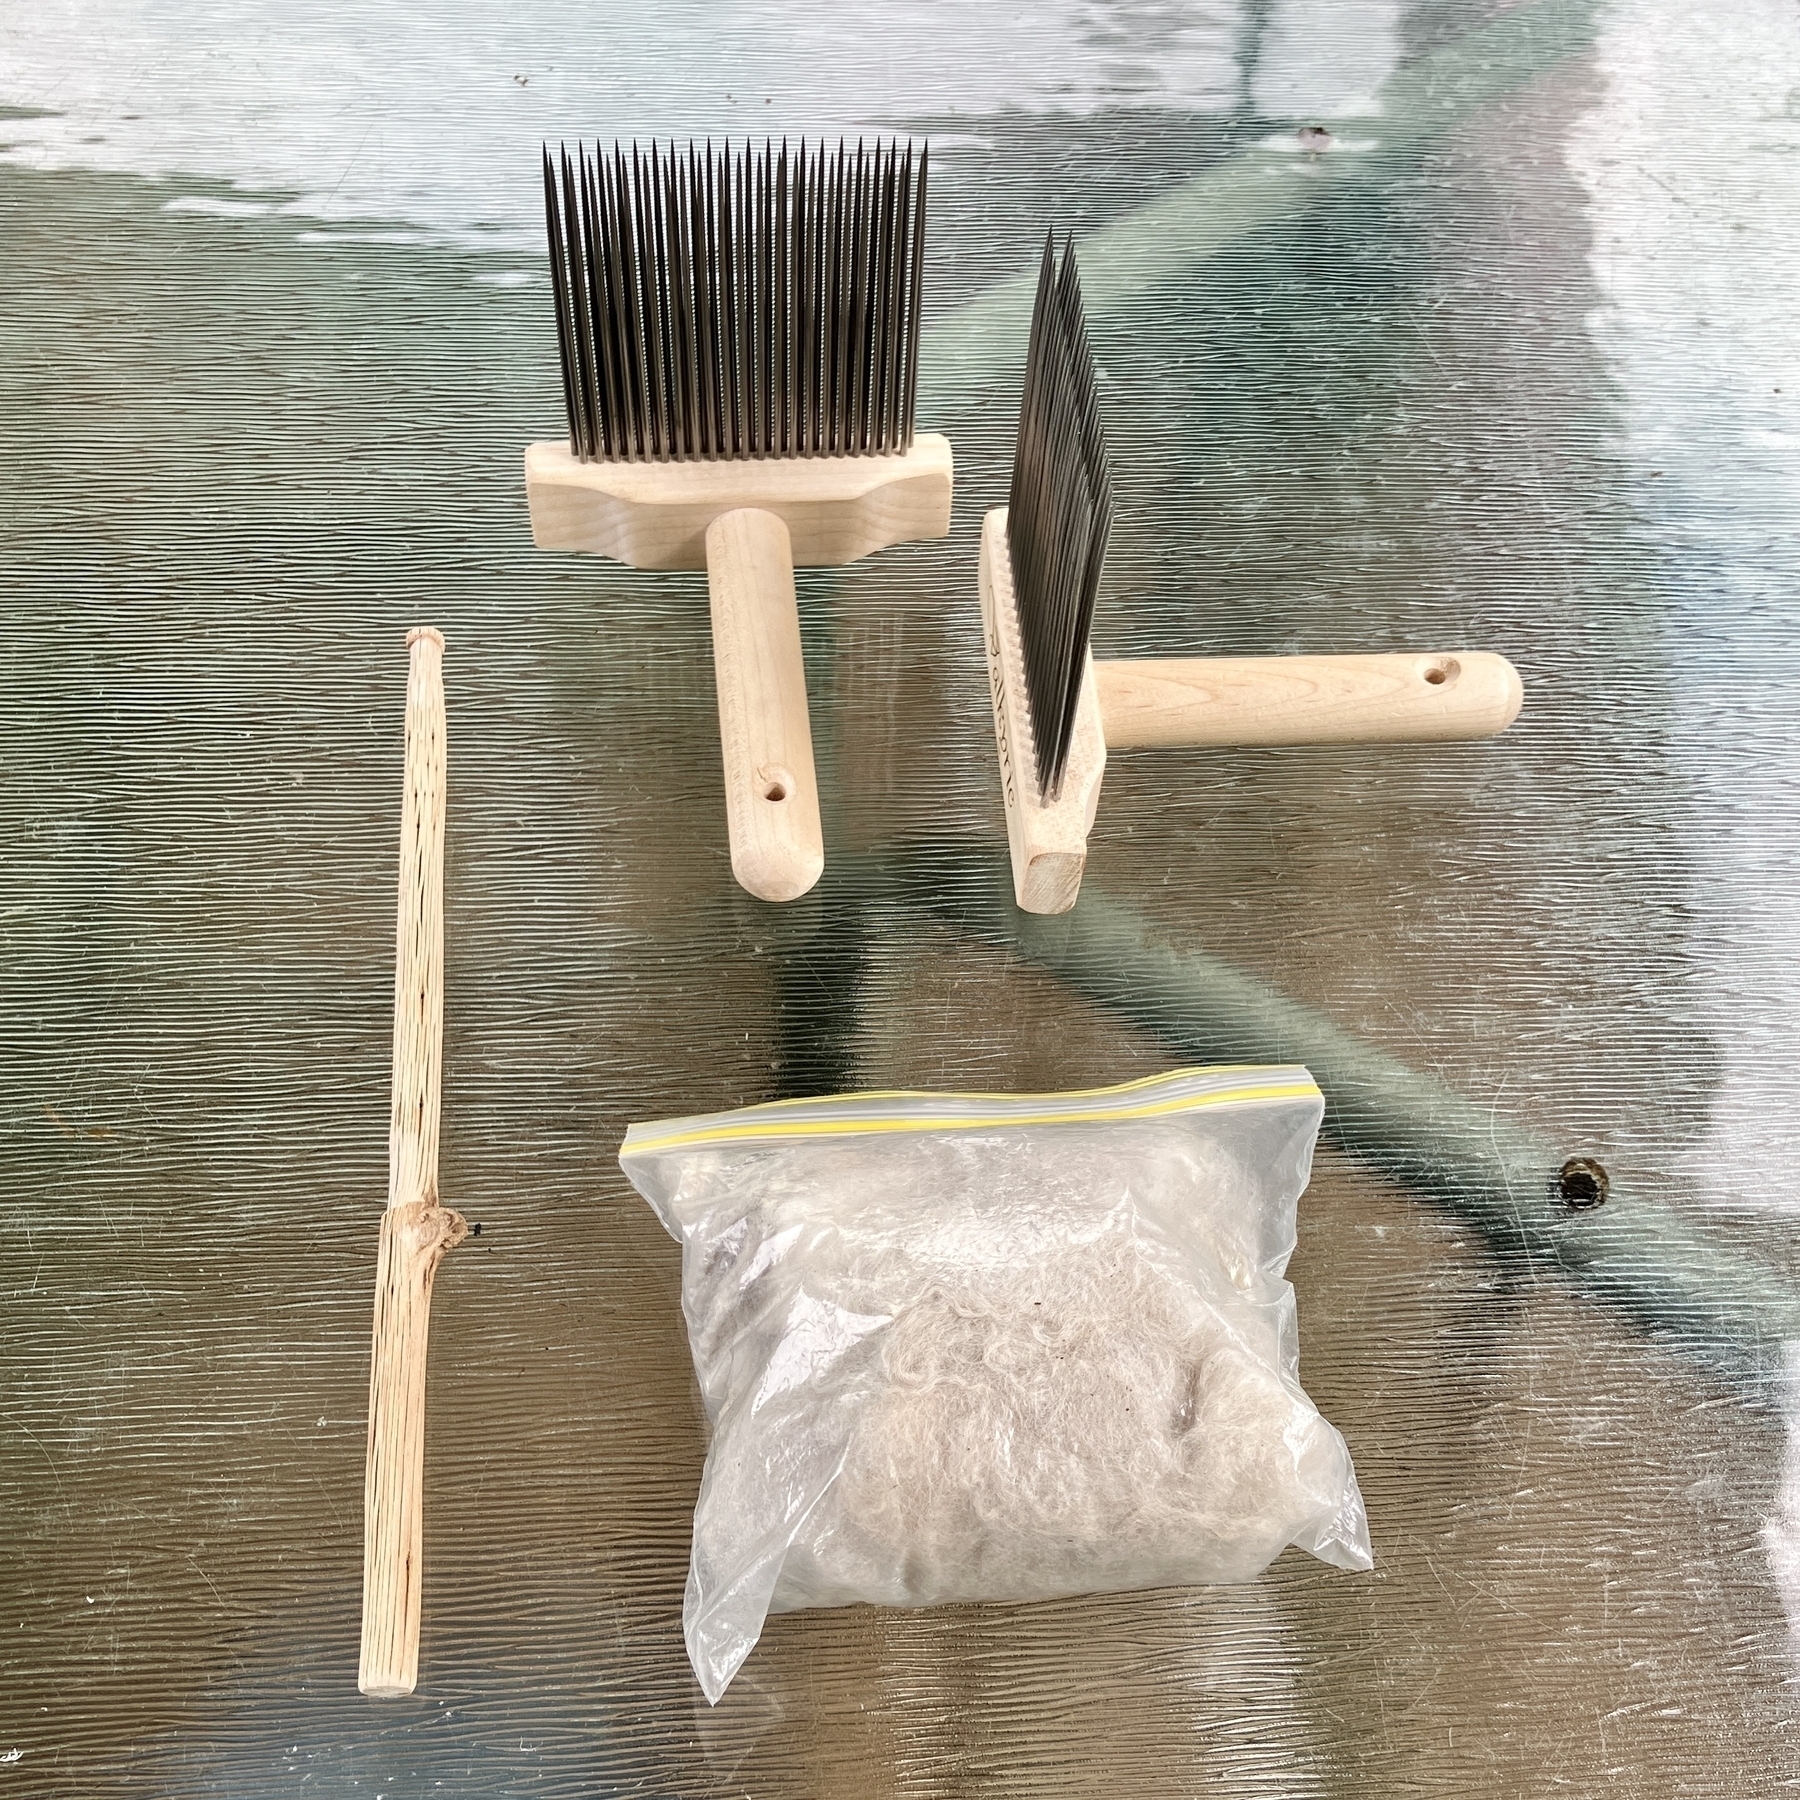 Two wool combs, a hand distaff, and a small plastic bag full of beige fibre sit on a glass table.